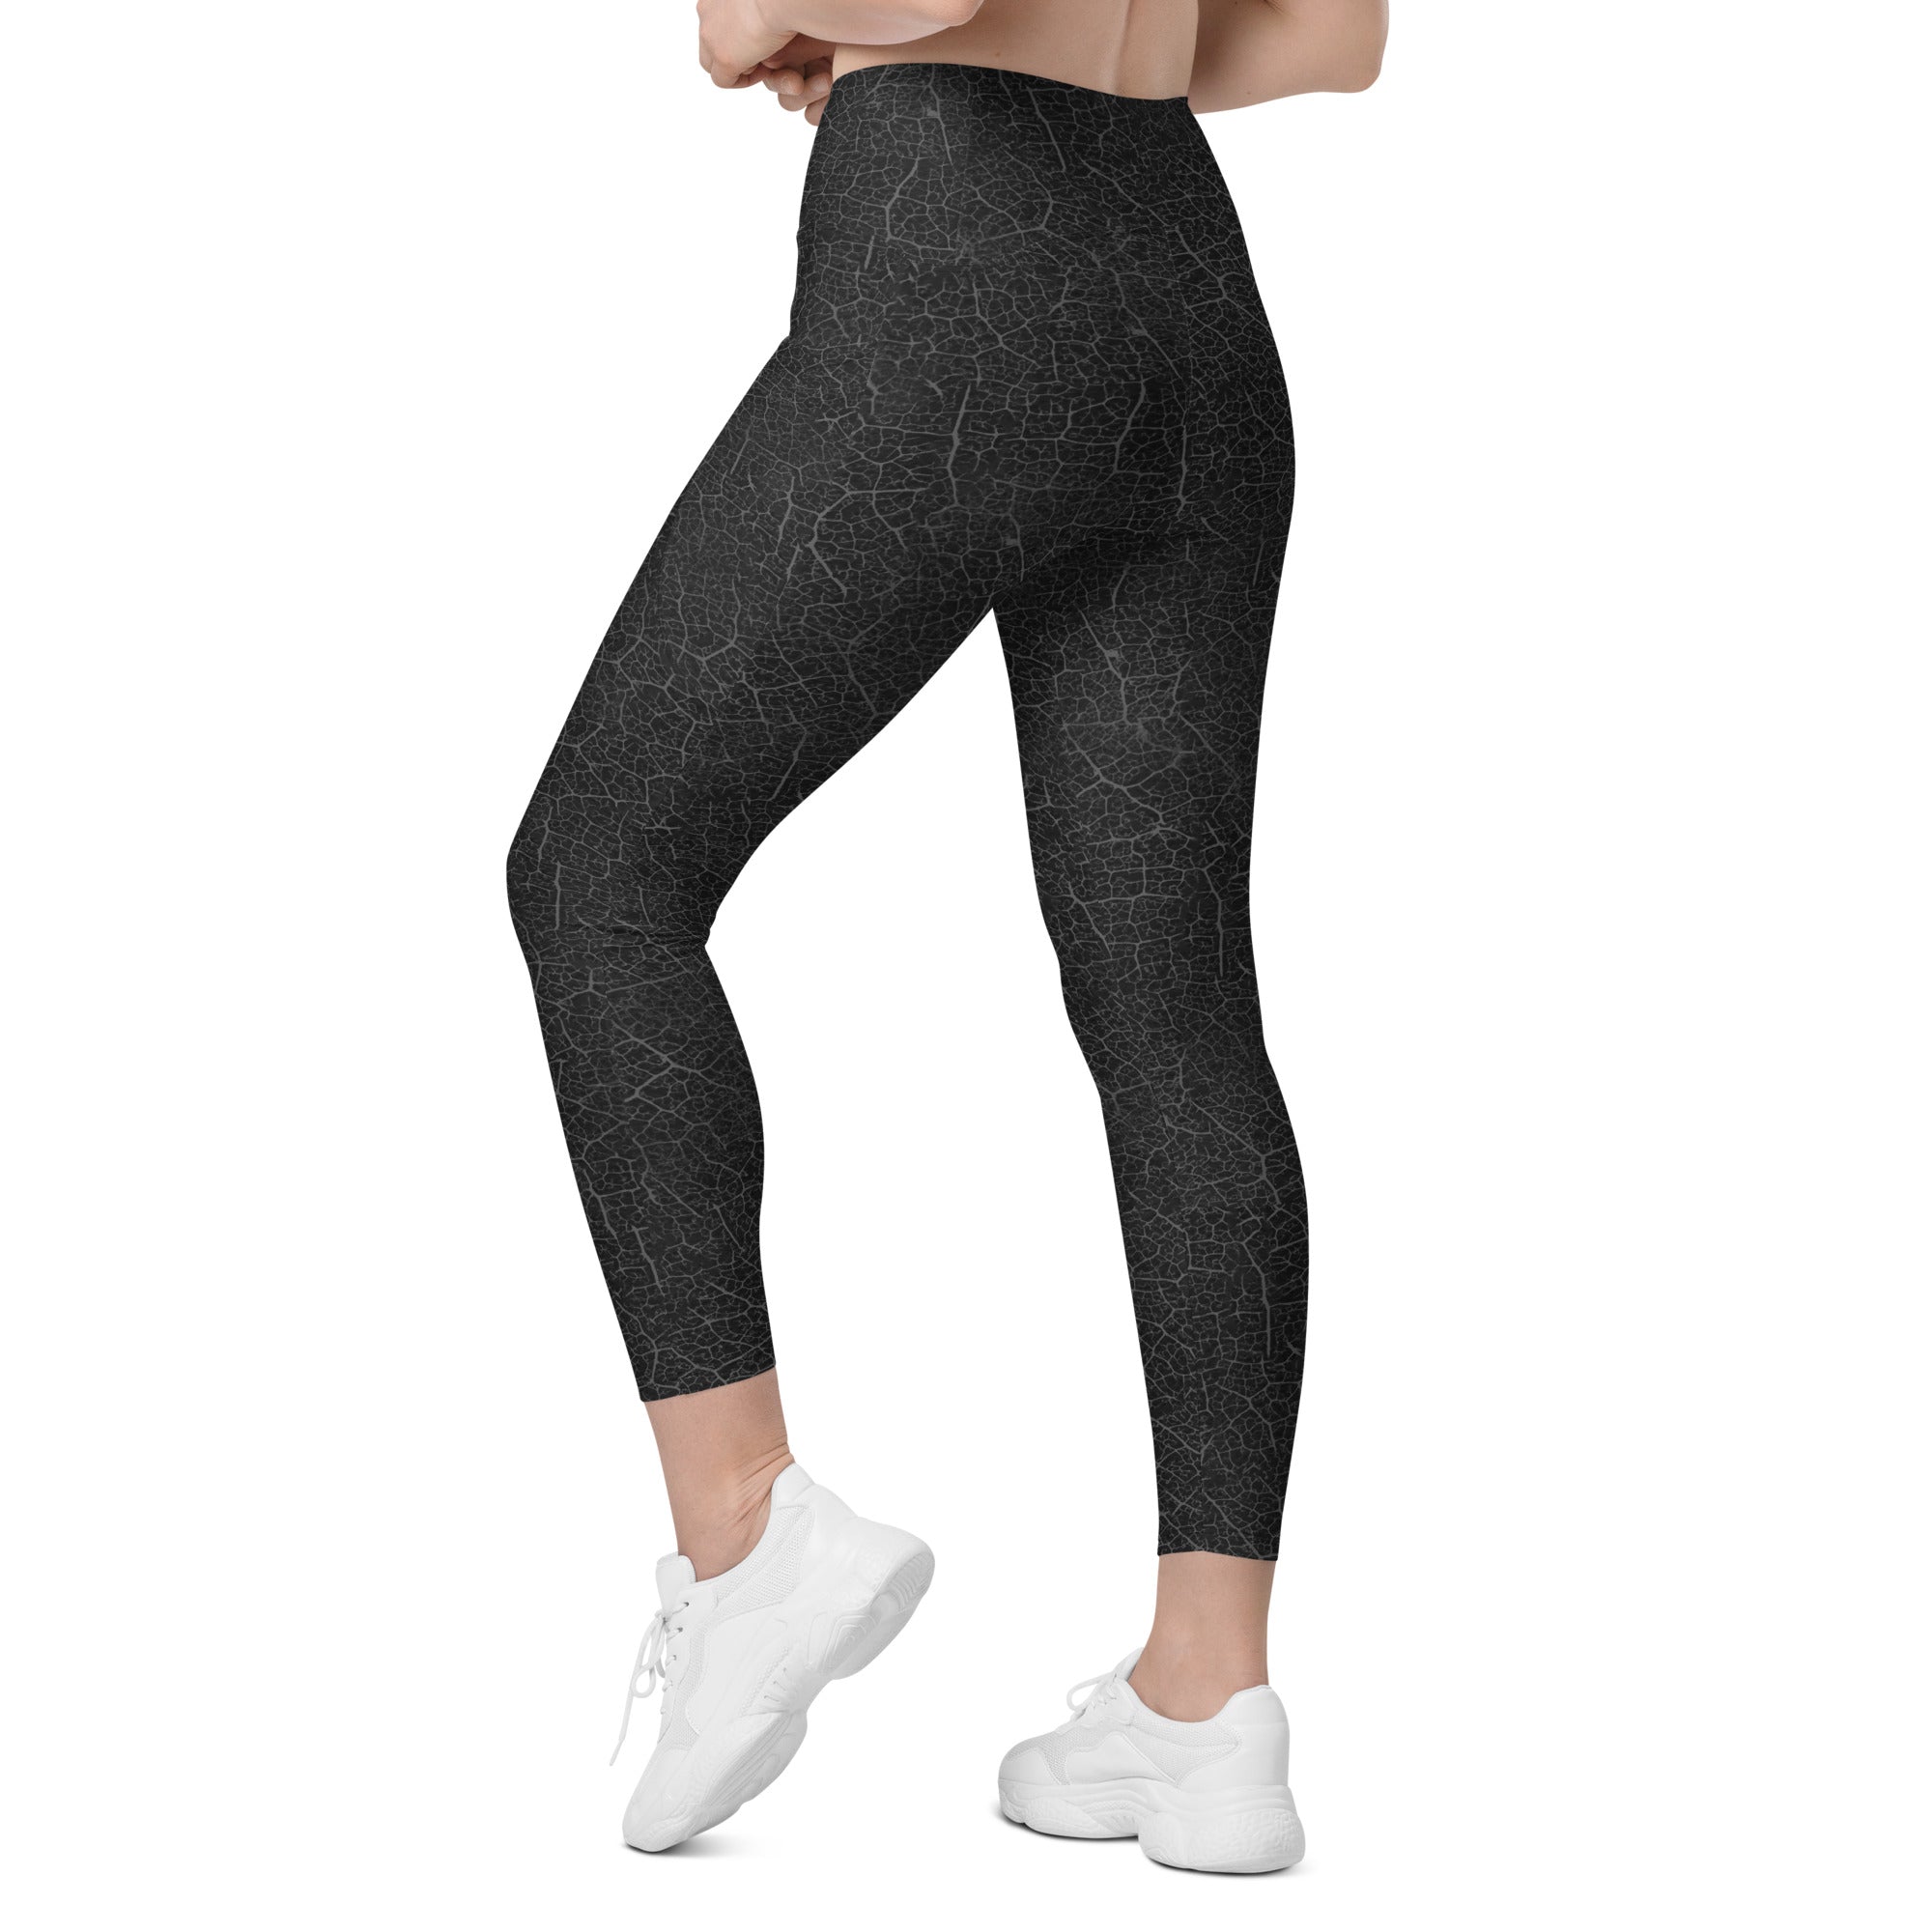 Zen Garden Crossover Leggings paired with a minimalist top, showcasing a stylish yet tranquil active wear ensemble.